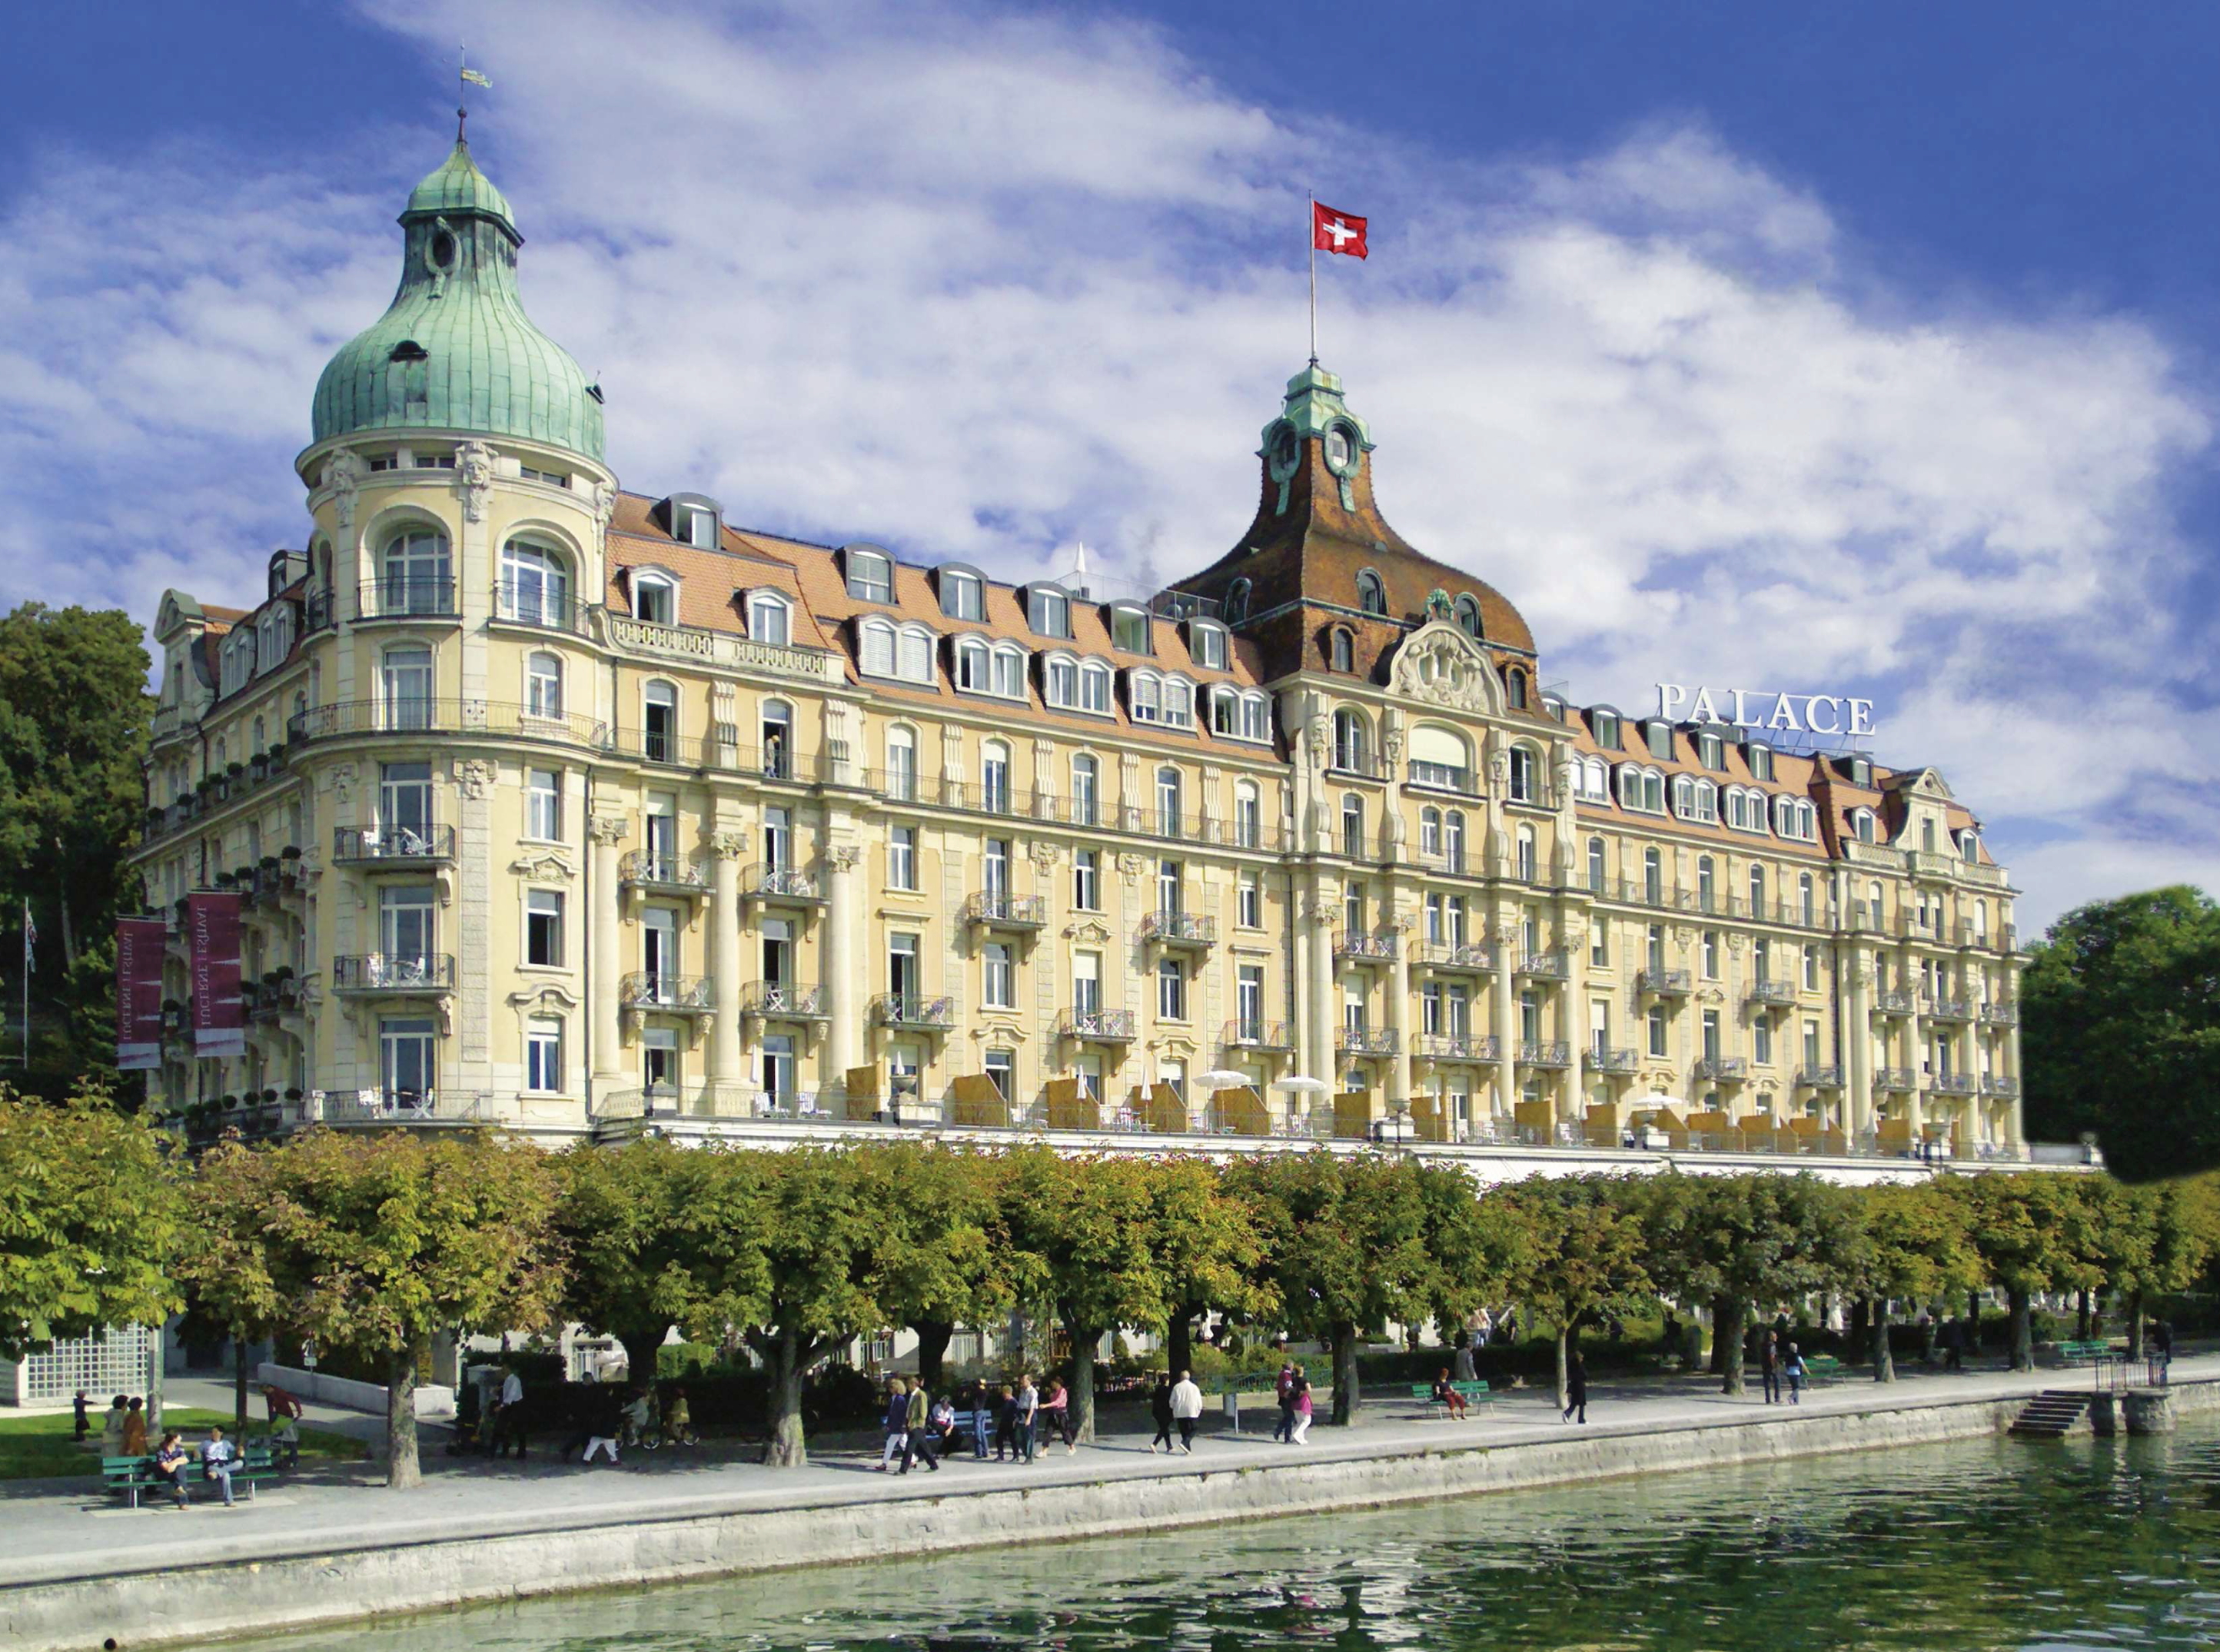 Mandarin Oriental has signed a management contract that will see it rebrand an existing hotel on Lake Lucerne (known locally as Lake Luzern), Switzerland. The property is currently undergoing an extensive renovation and will re-open as Mandarin Oriental Palace, Luzern at the end of 2020. Click to enlarge.